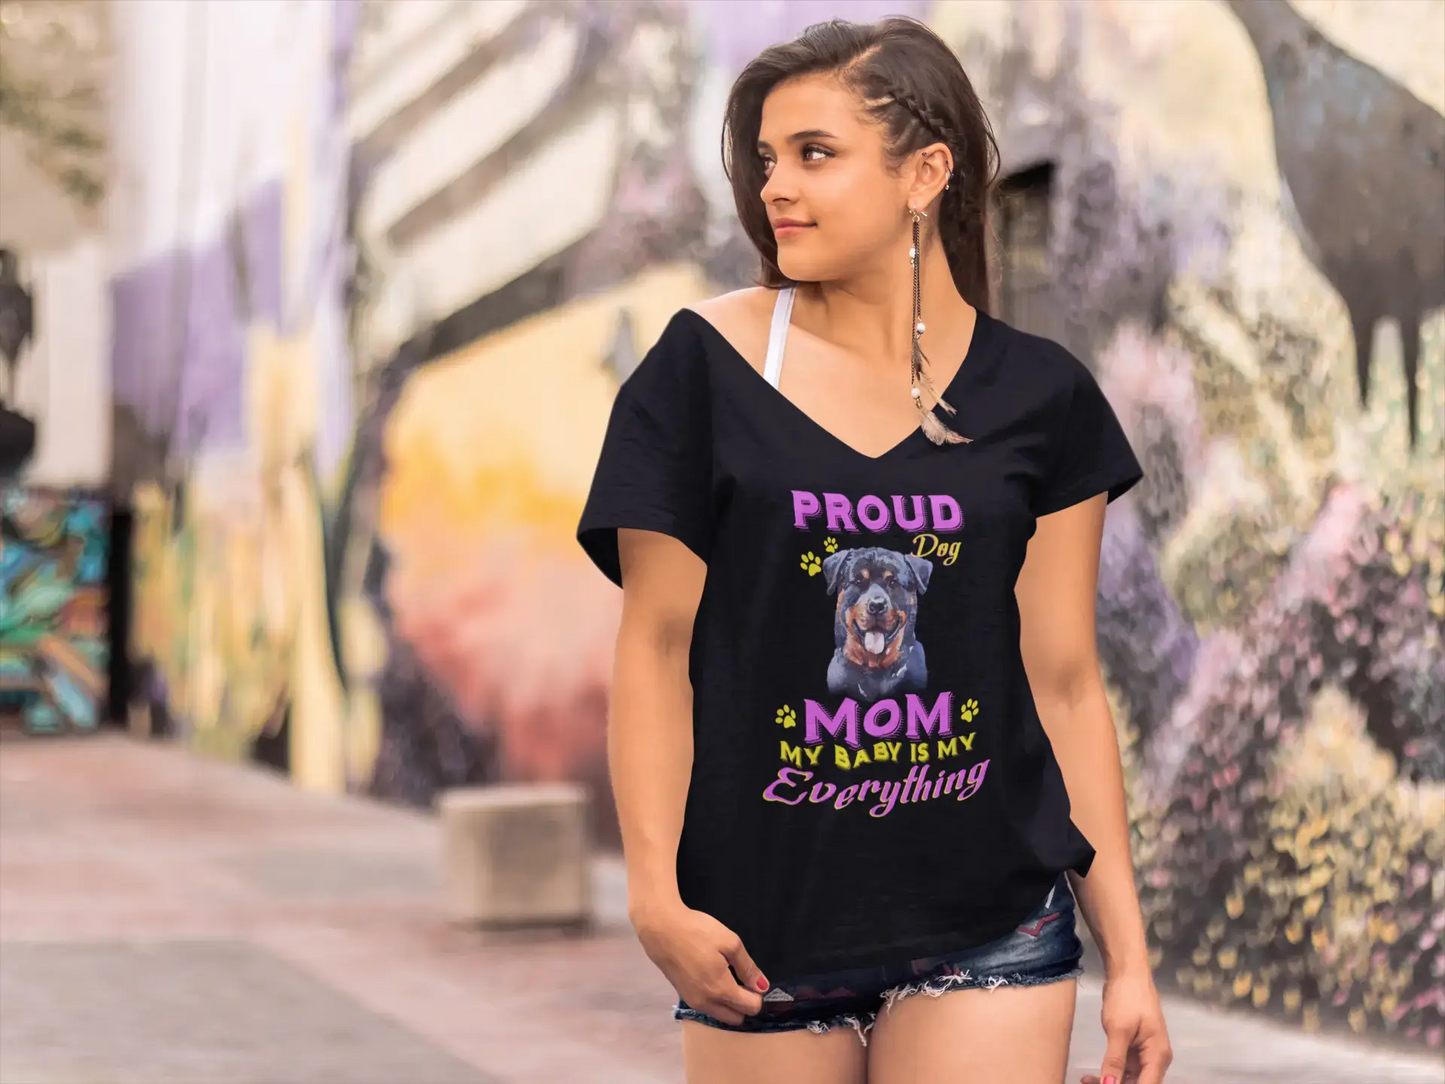 ULTRABASIC Women's T-Shirt Proud Day - Rottweiler Dog Mom - My Baby is My Everything